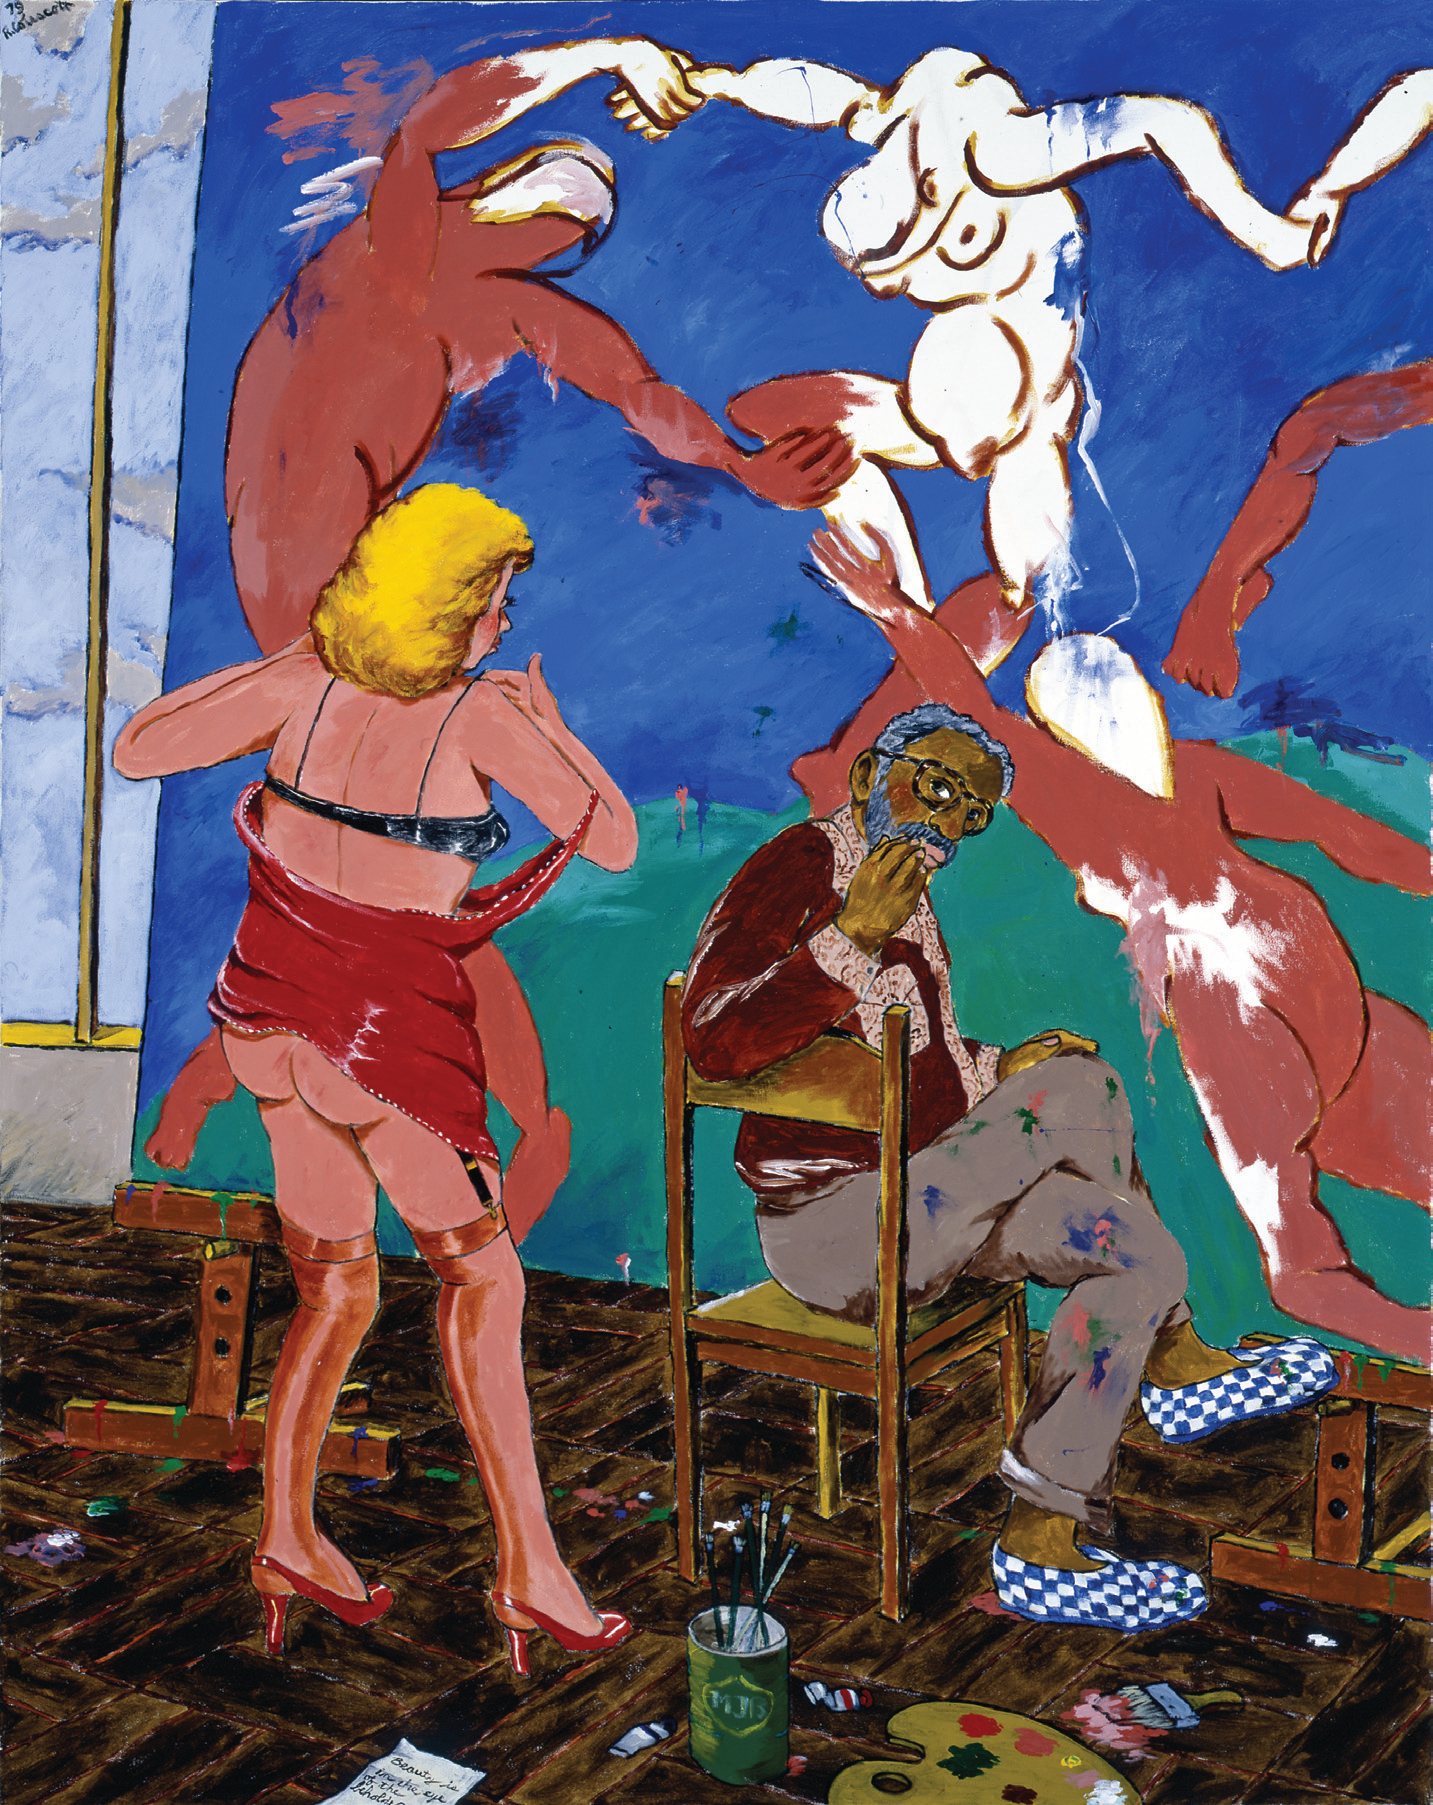 Colescott-painting-Beauty-is-in-the-eye-of-the-beholder